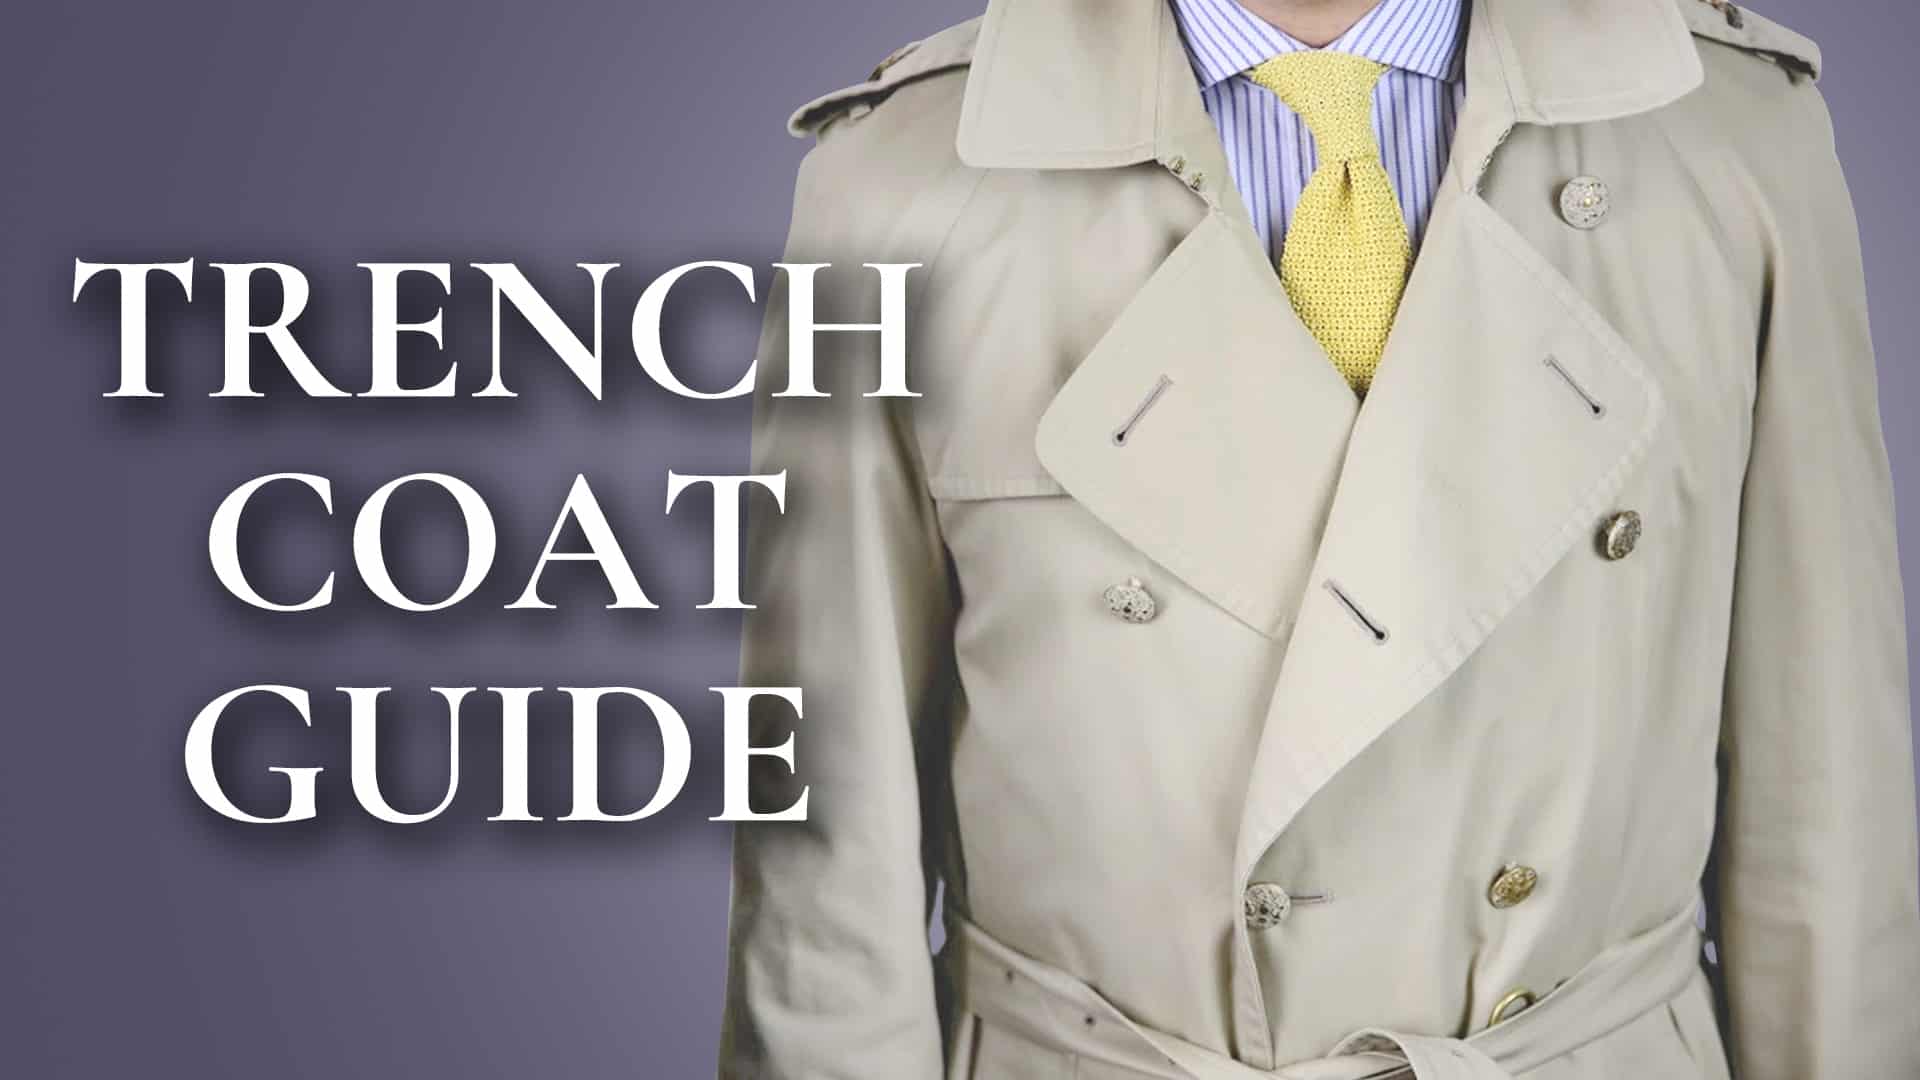 Trench Coat Guide - How To Wear & Buy A Burberry or Aquascutum Trenchcoat